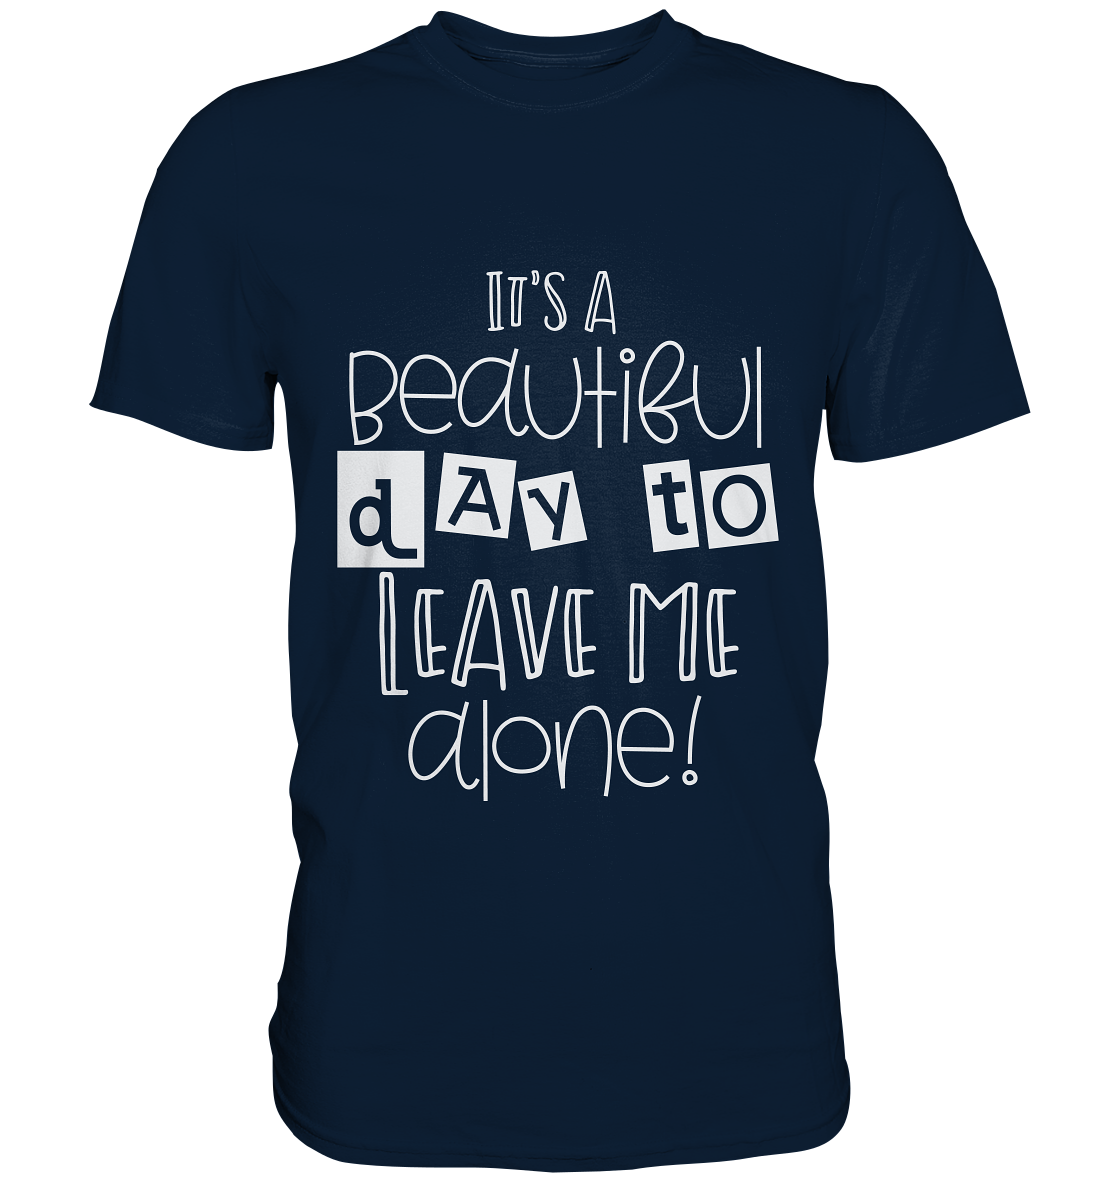 It´s a beautiful day to leave me alone - Unisex Premium Shirt